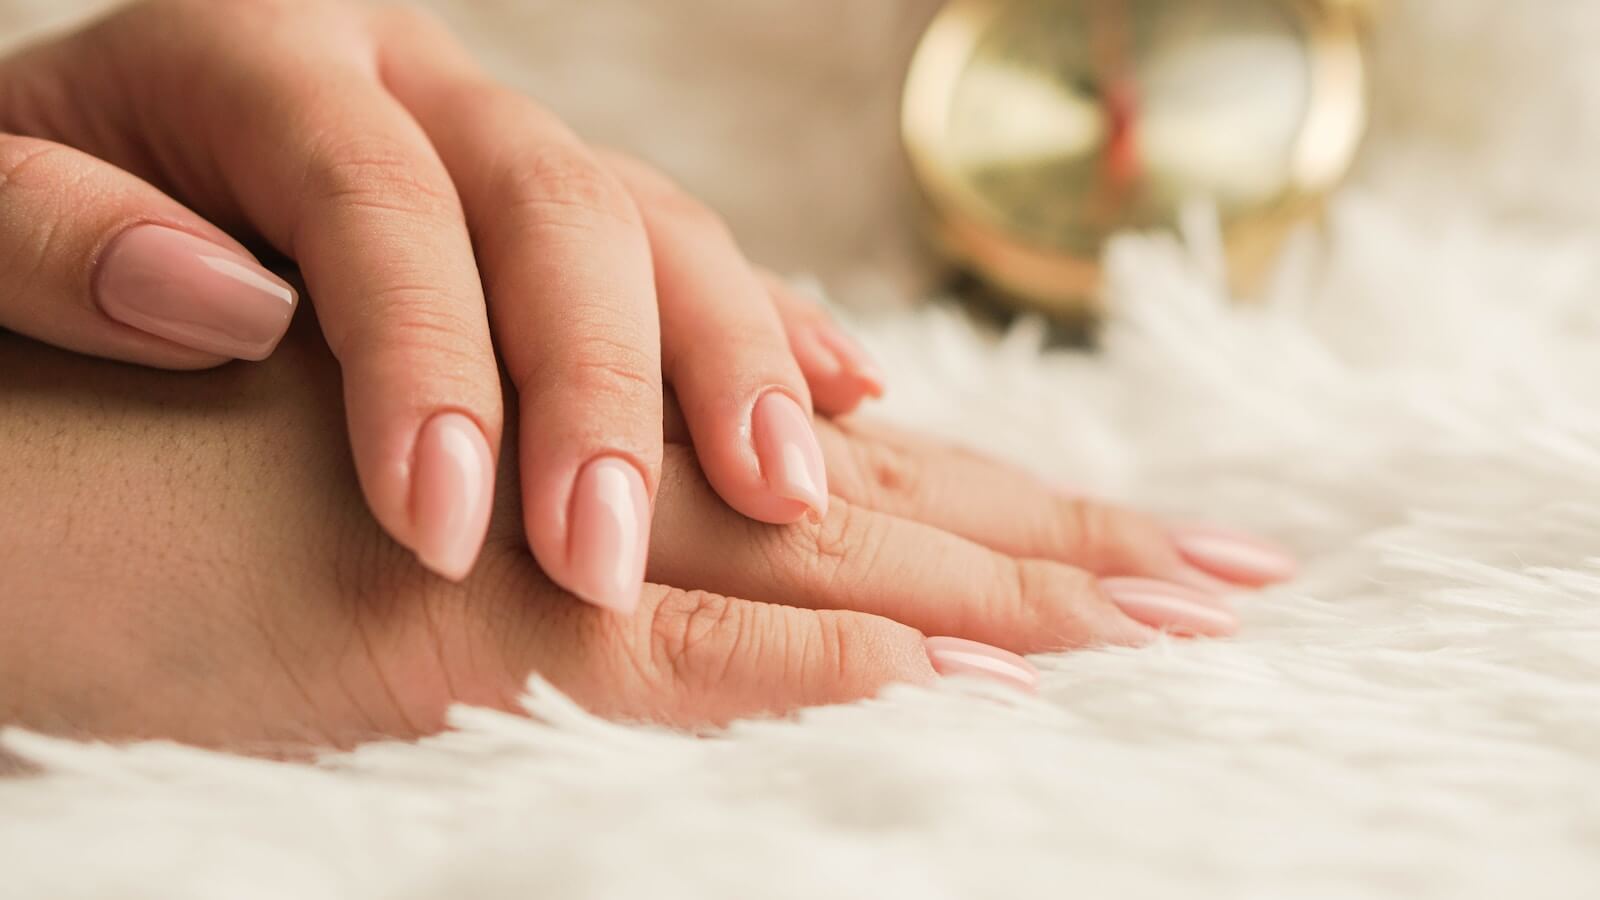 A woman's manicured hands